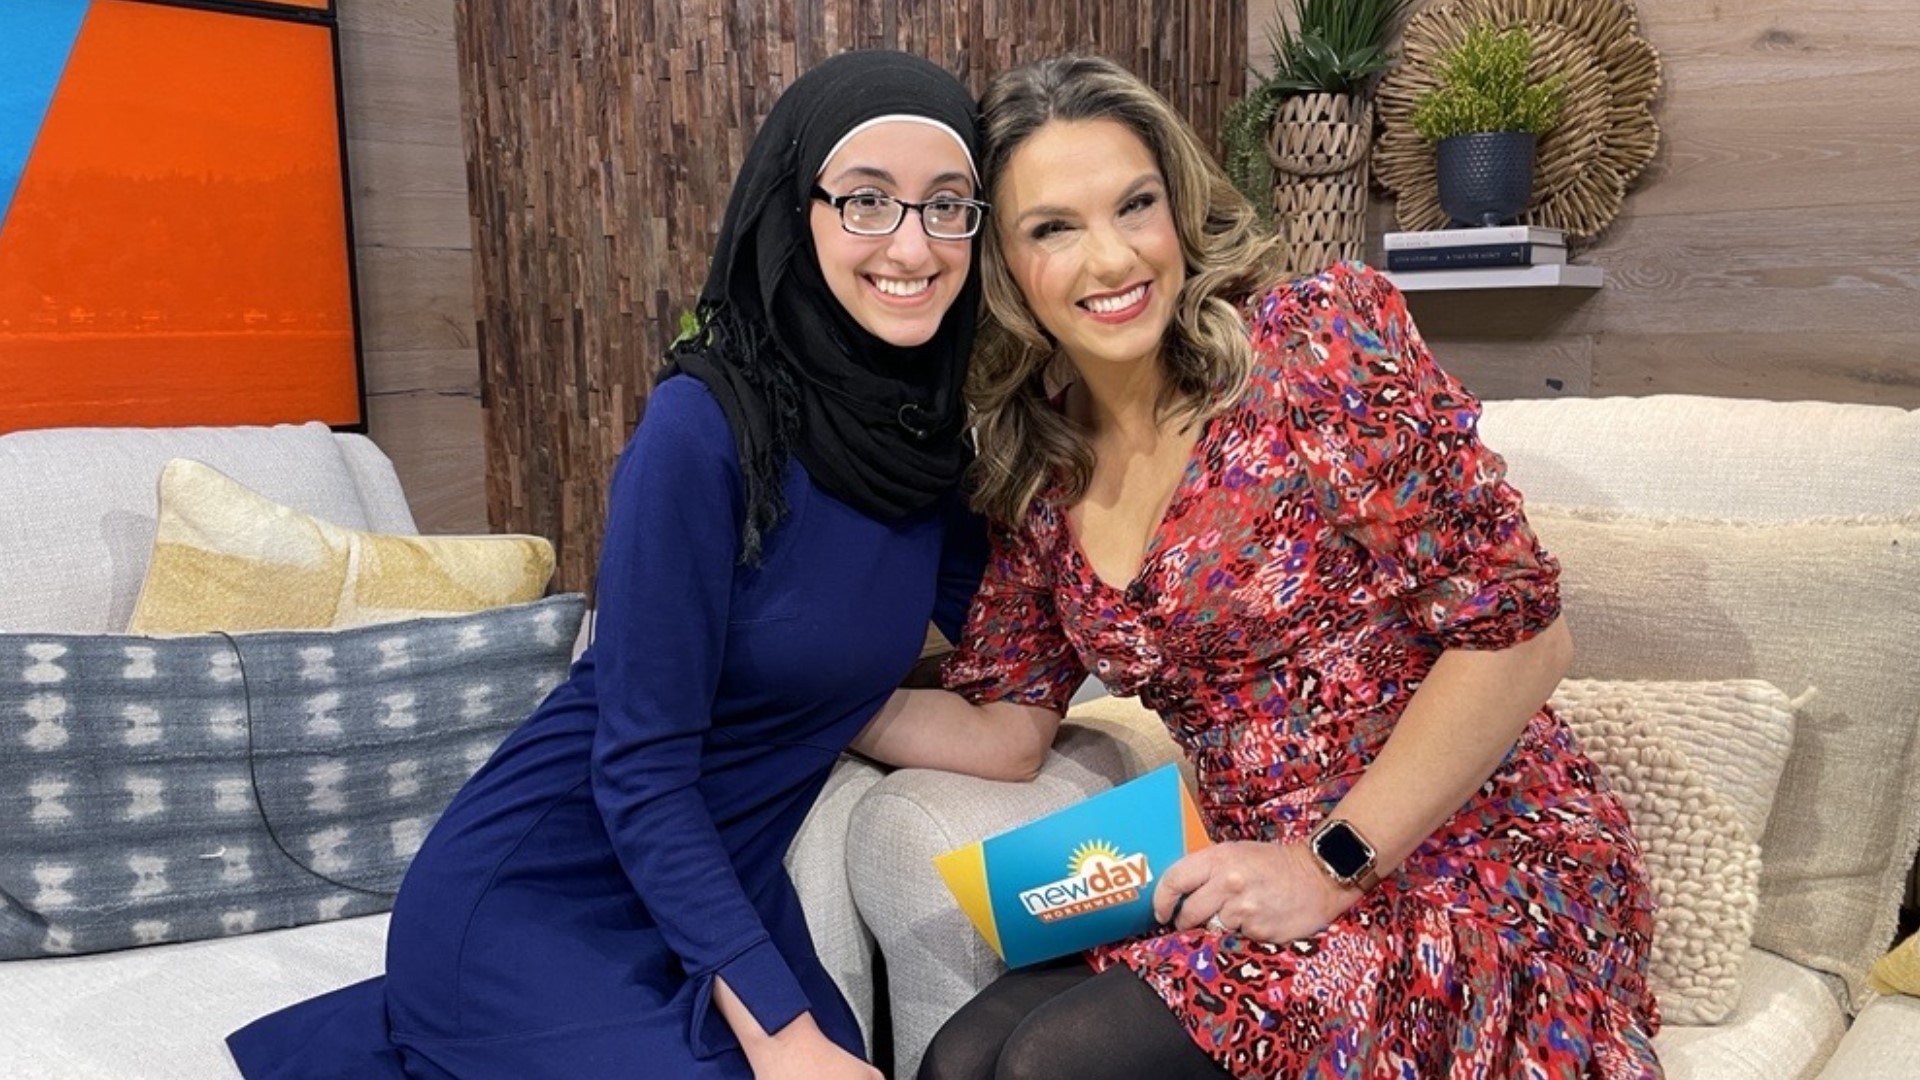 KING 5 Evening intern, Solen Aref, joined New Day to talk about Ramadan, a month observed by Muslims worldwide. #newdaynw